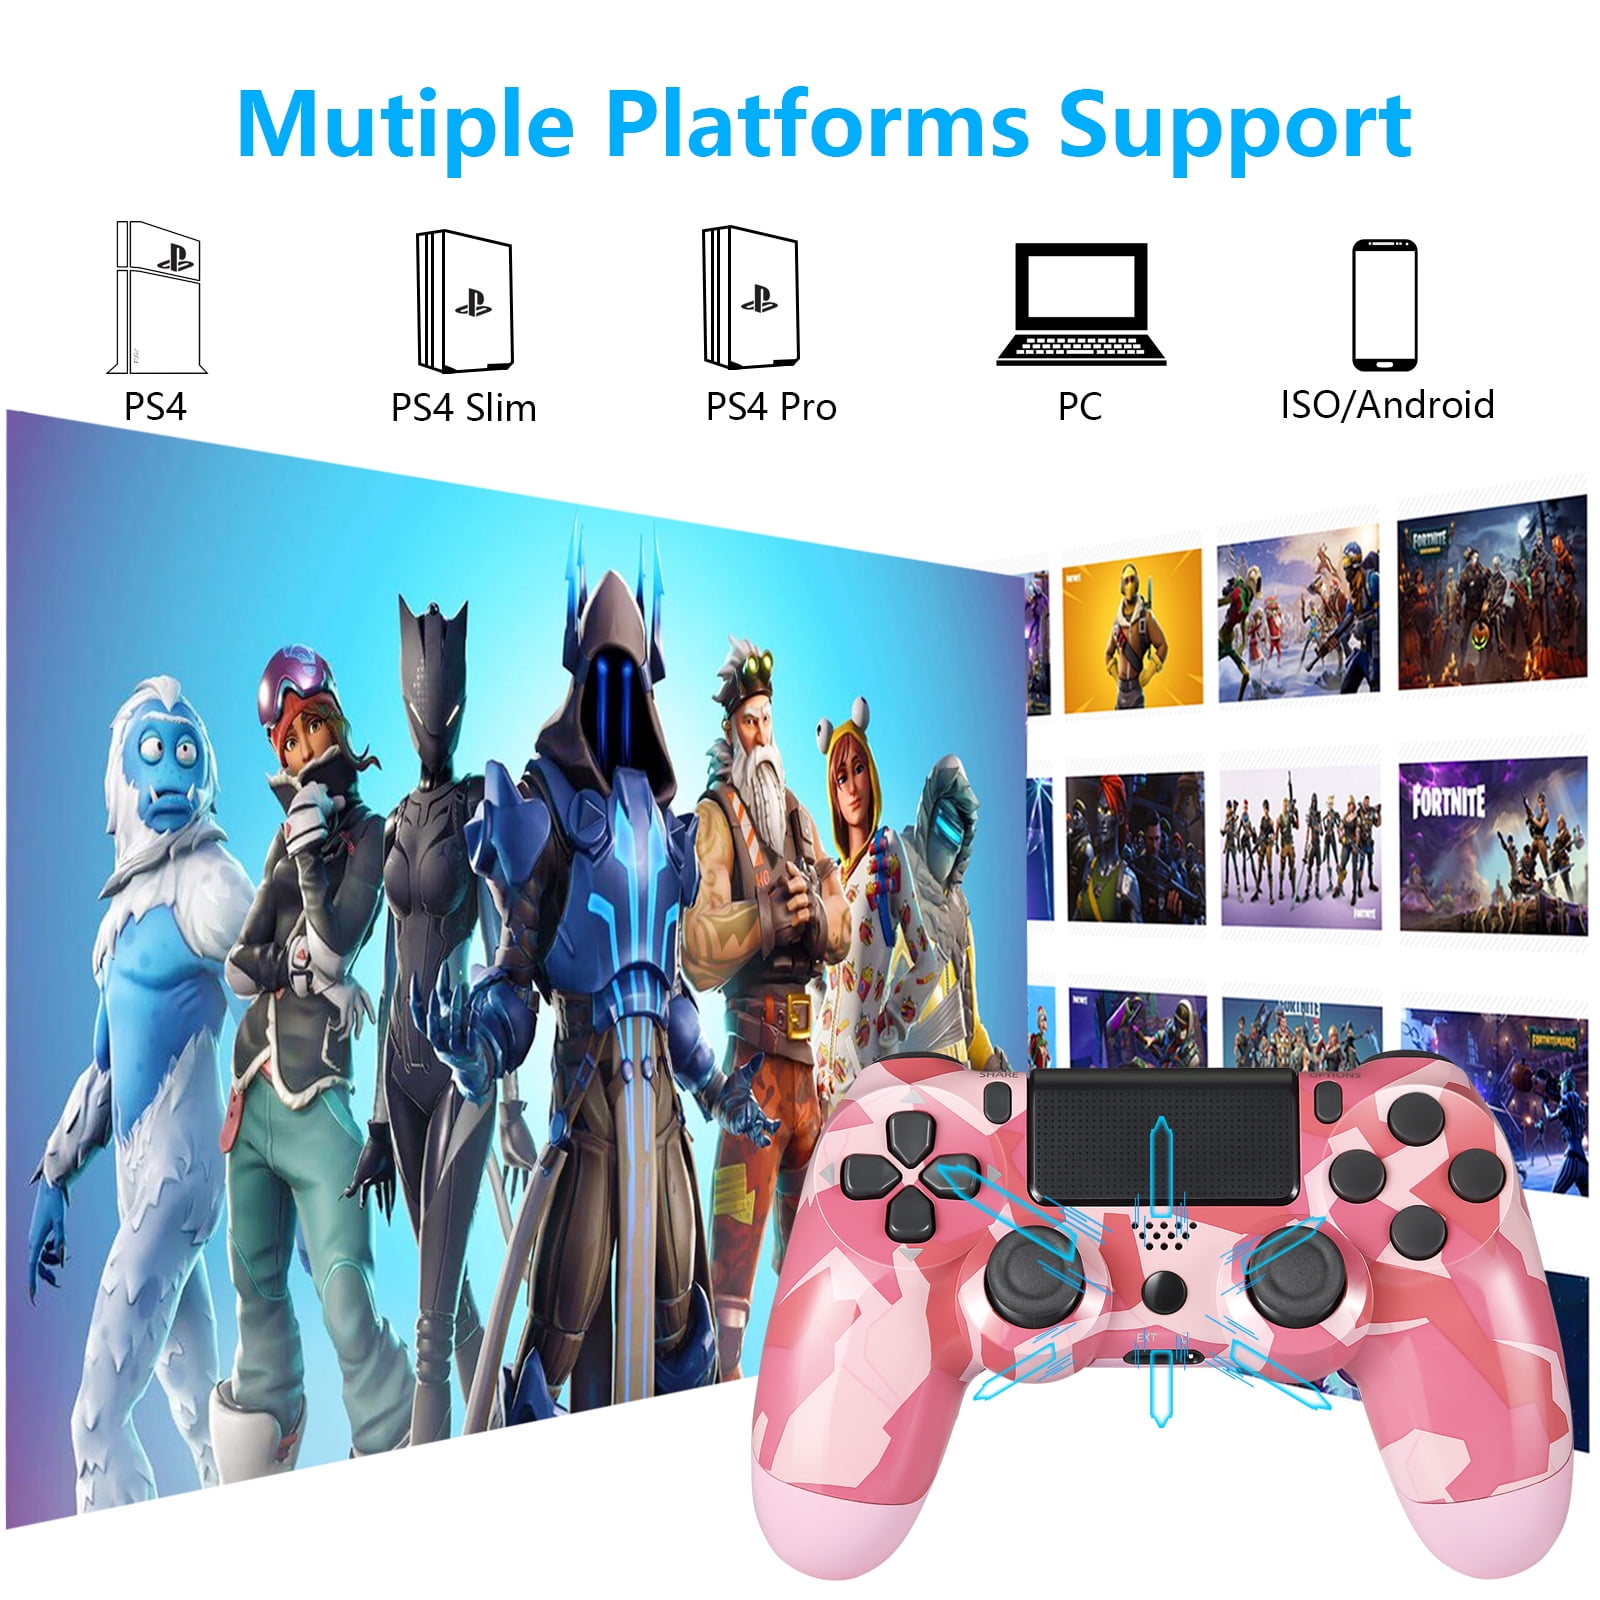 PS4 Controller, PS4 Controller Wireless, Playstation Controller PS4, PS4 Controller, PS4 Pro Controller for Playstation 4/Pro/Slim Console with Charging Cable, Black - Walmart.com